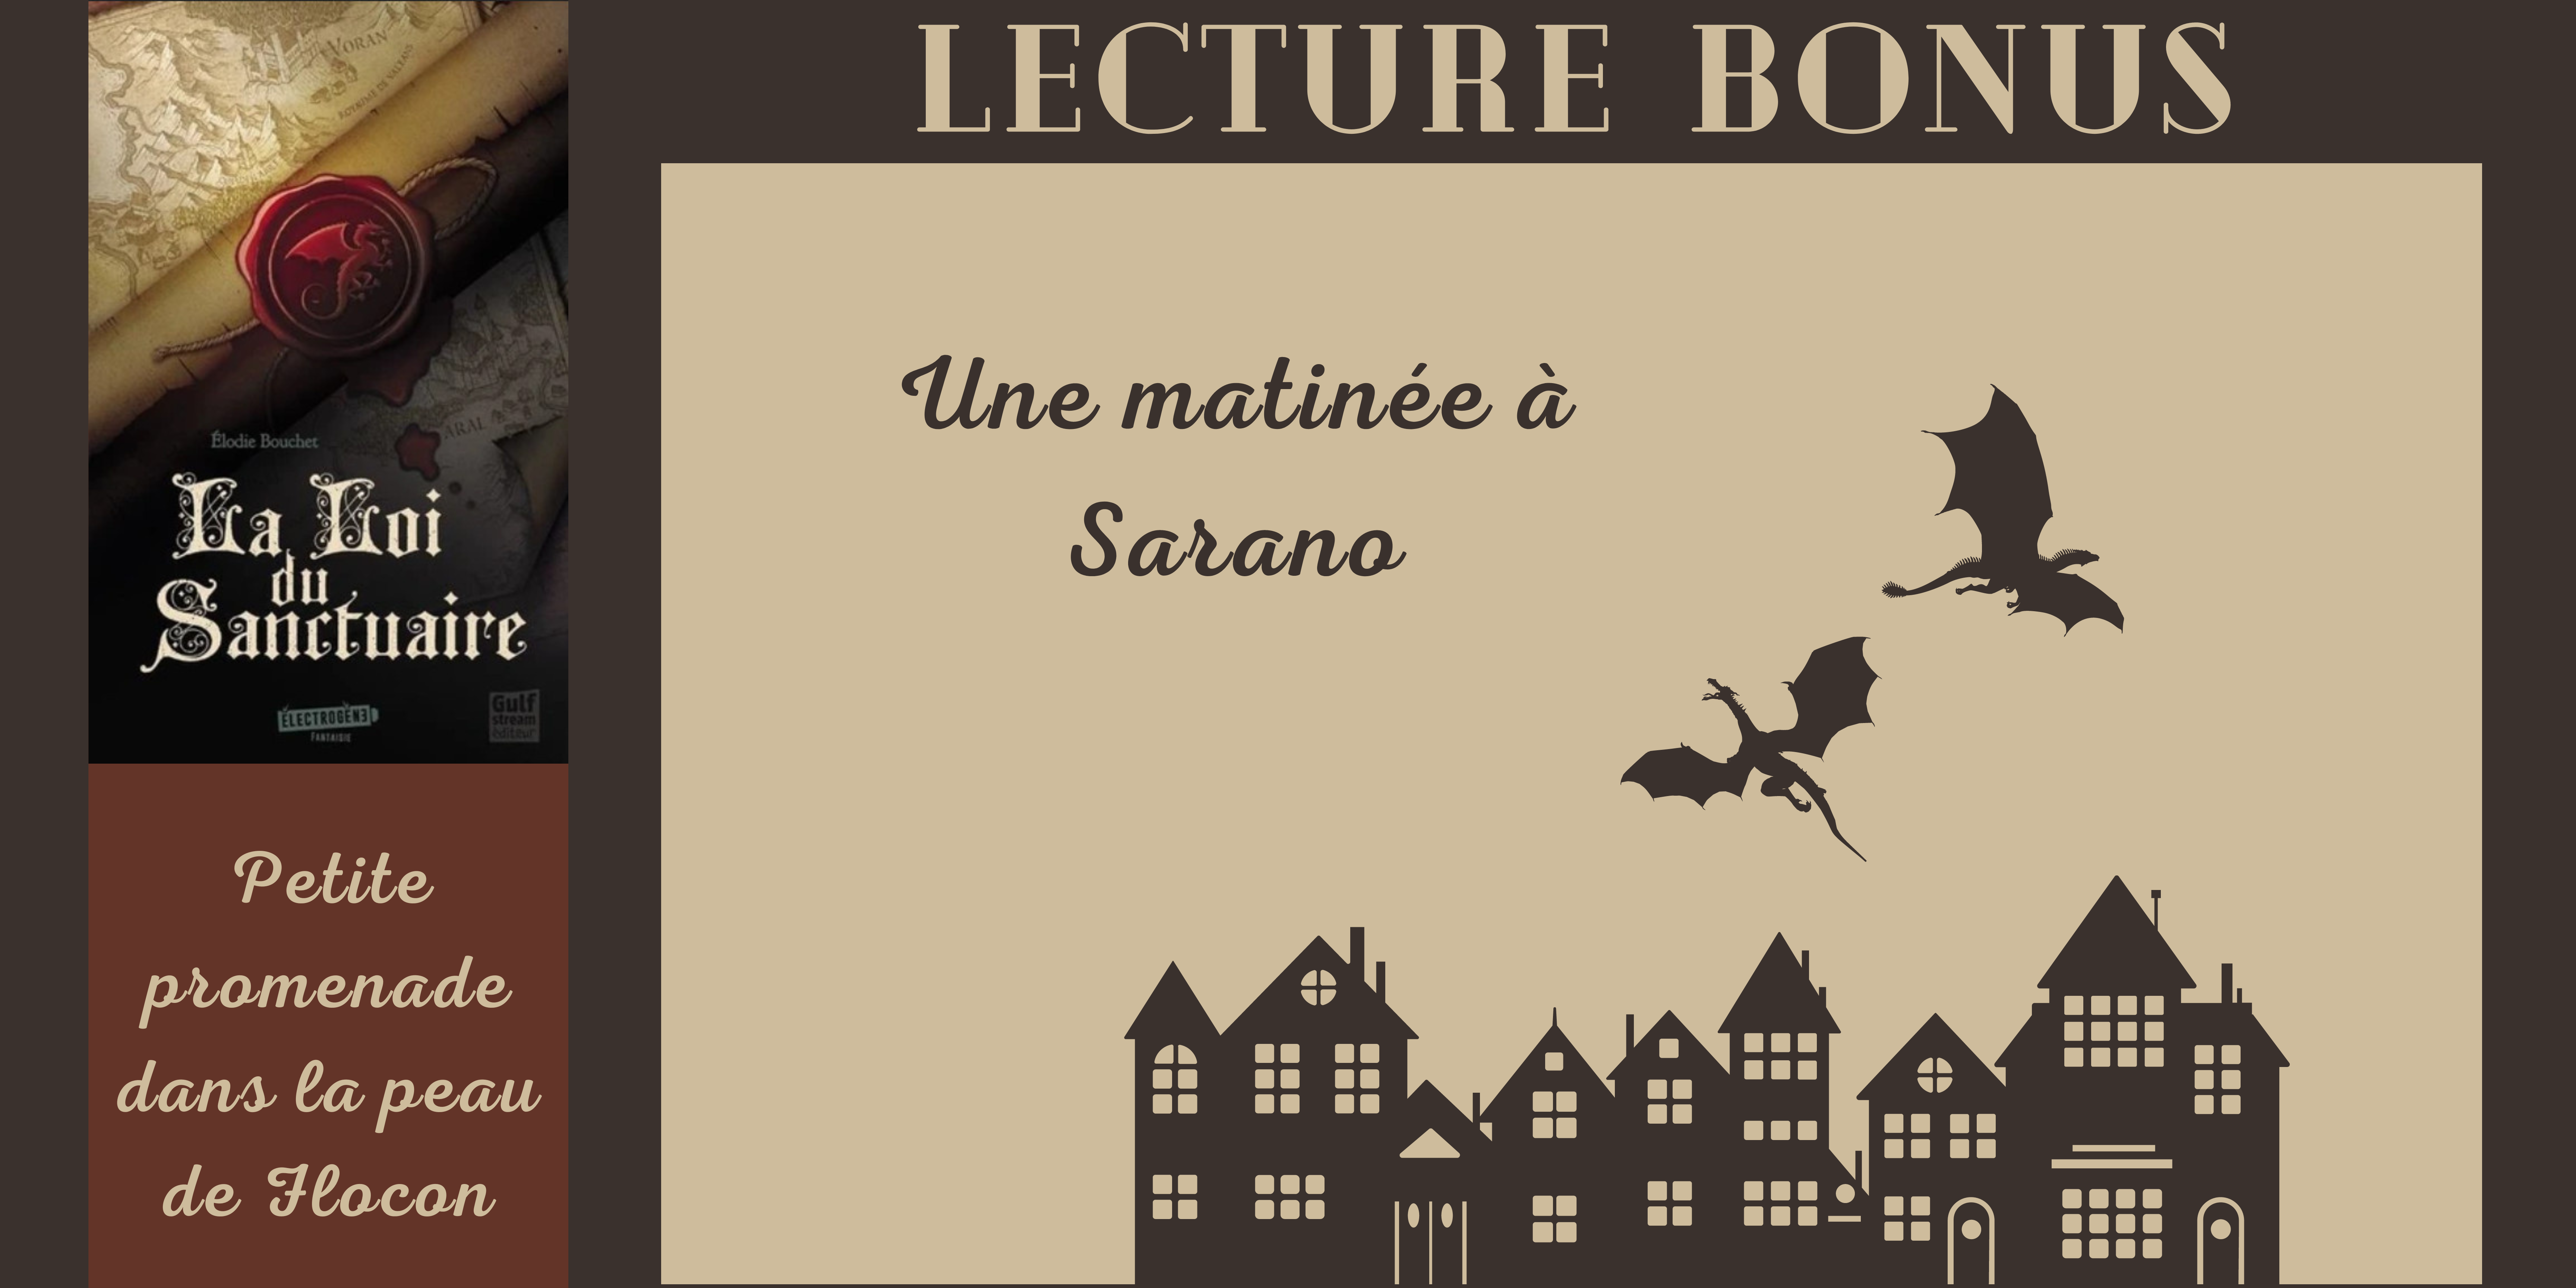 You are currently viewing Lecture bonus : Une matinée à Sarano